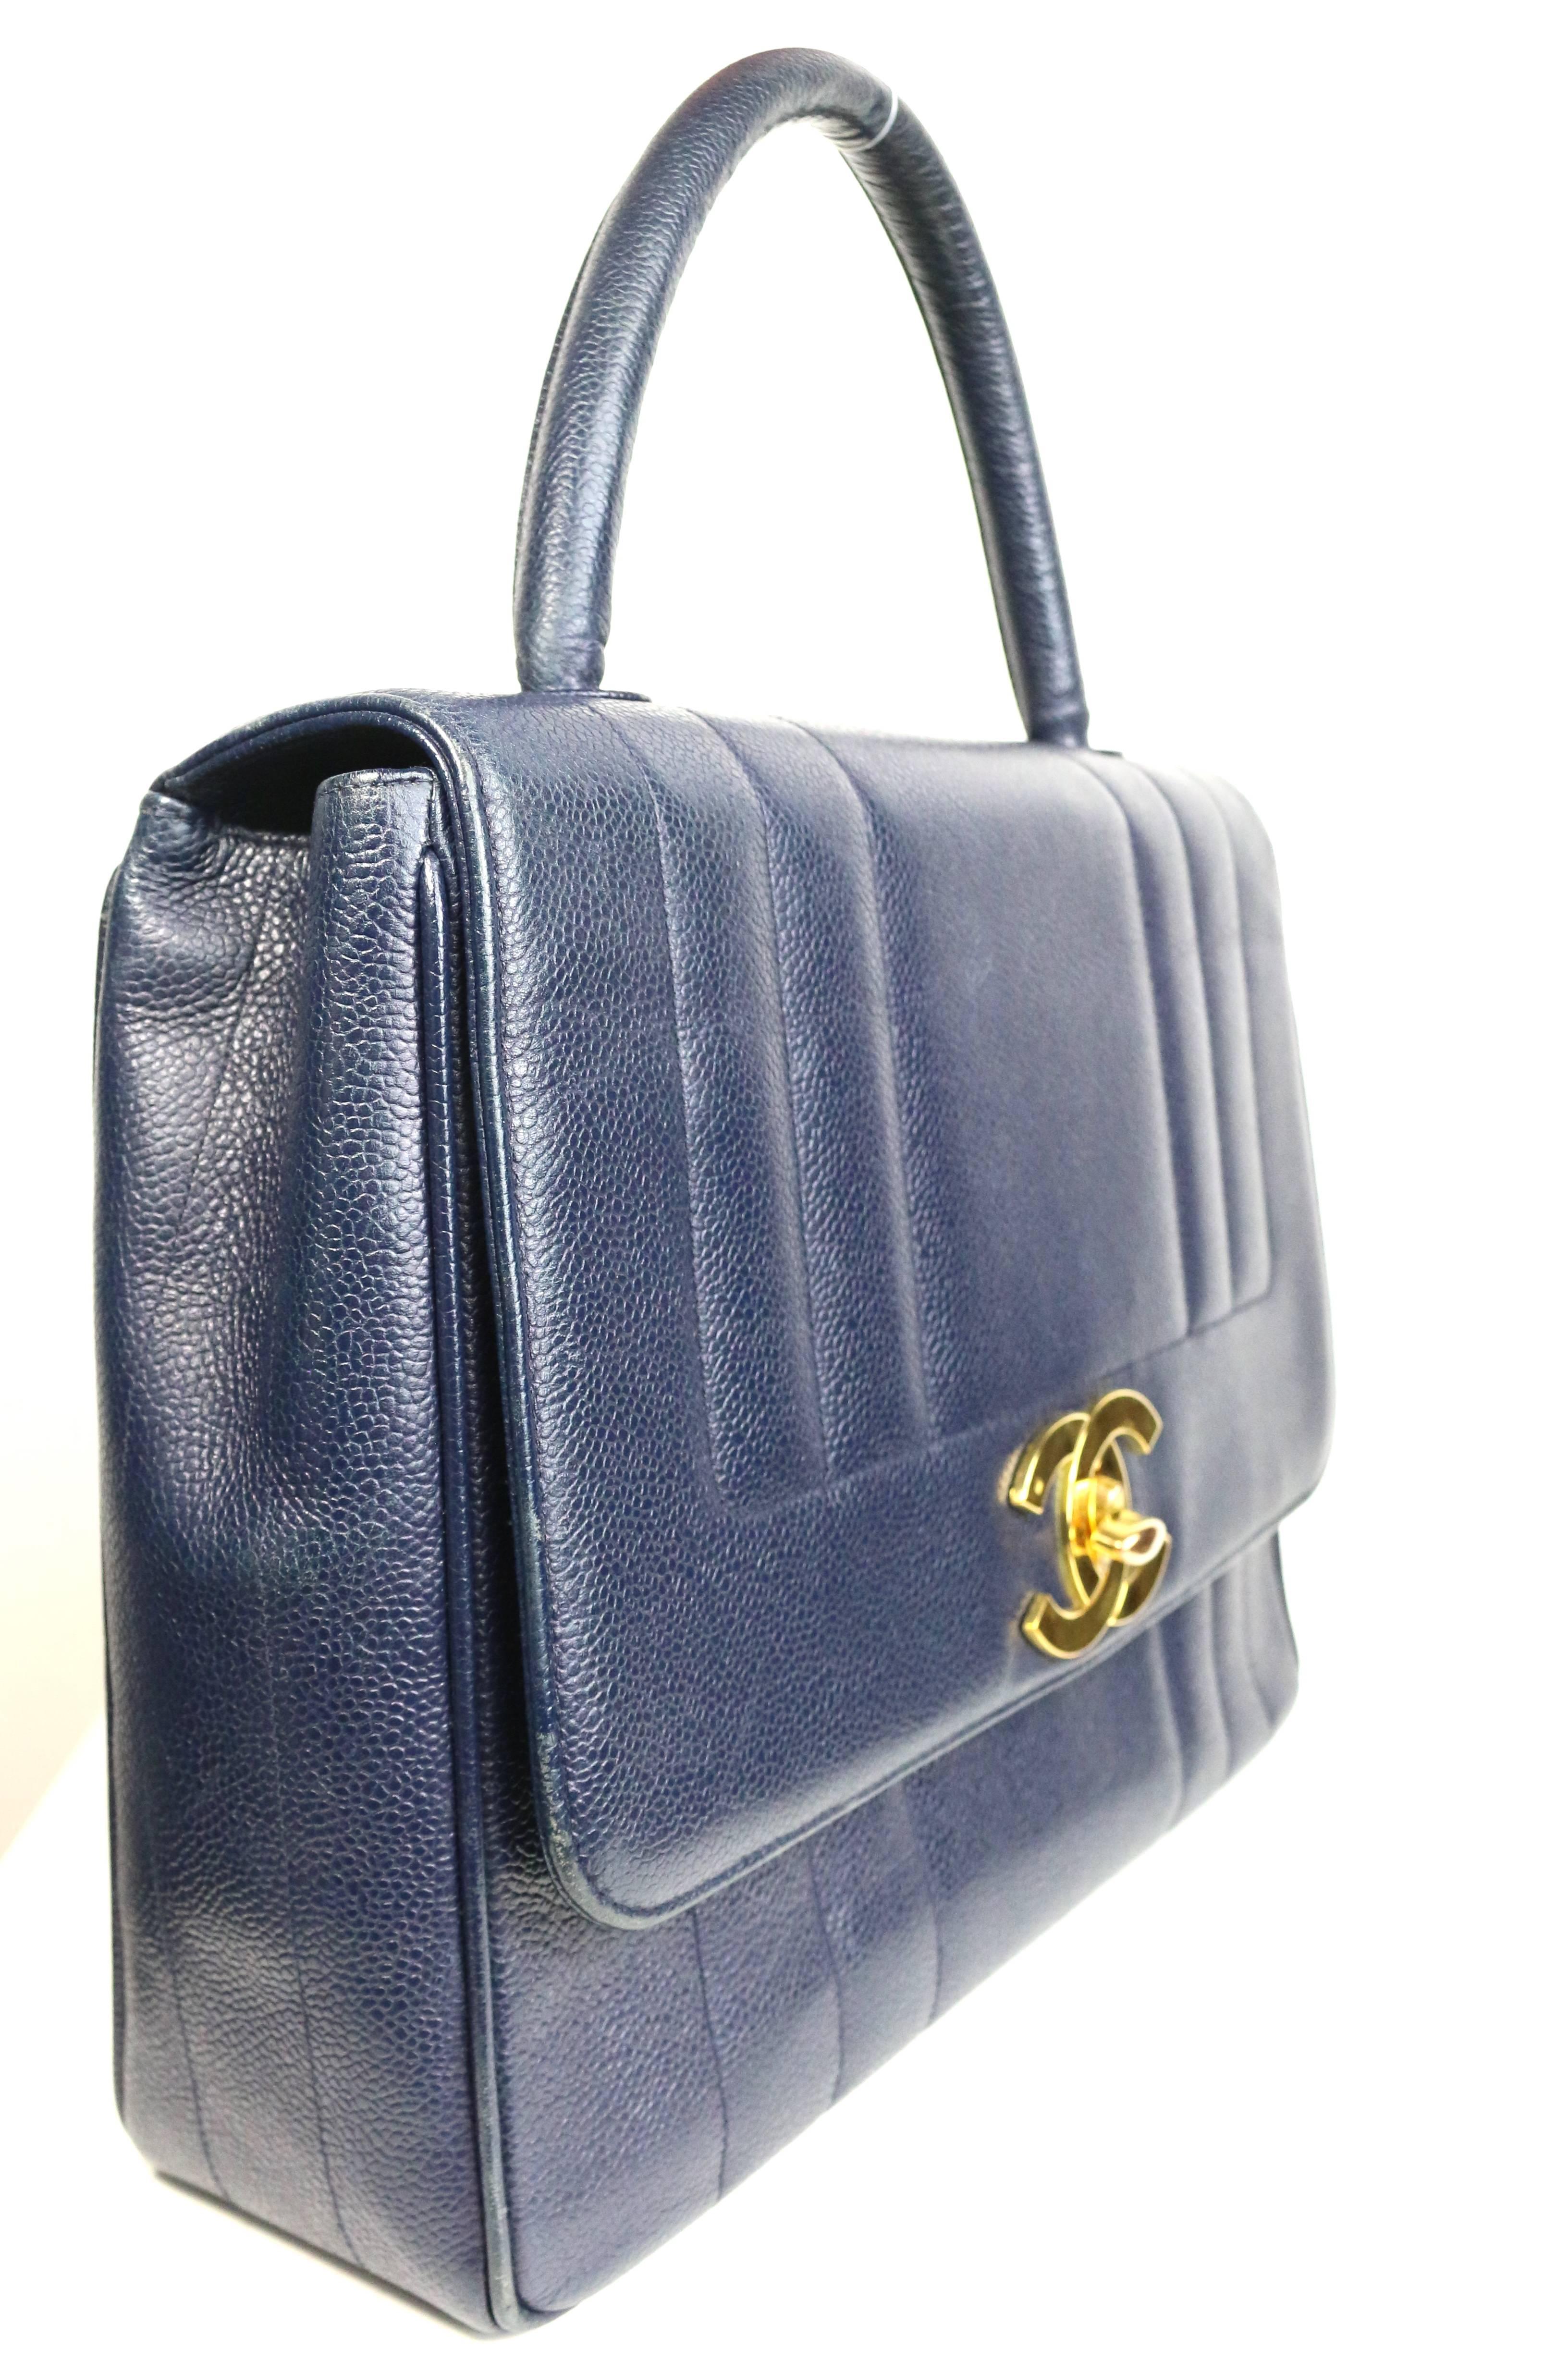 - Vintage 90s Chanel navy blue caviar leather flap handbag. 

- Classic gold toned "CC" Interlock closure. 

- Exterior Pocket. 

- One Interior zip pocket and one open pocket. 

- Length: 12 inches. Height: 9 inches. Width: 3.5 inches.